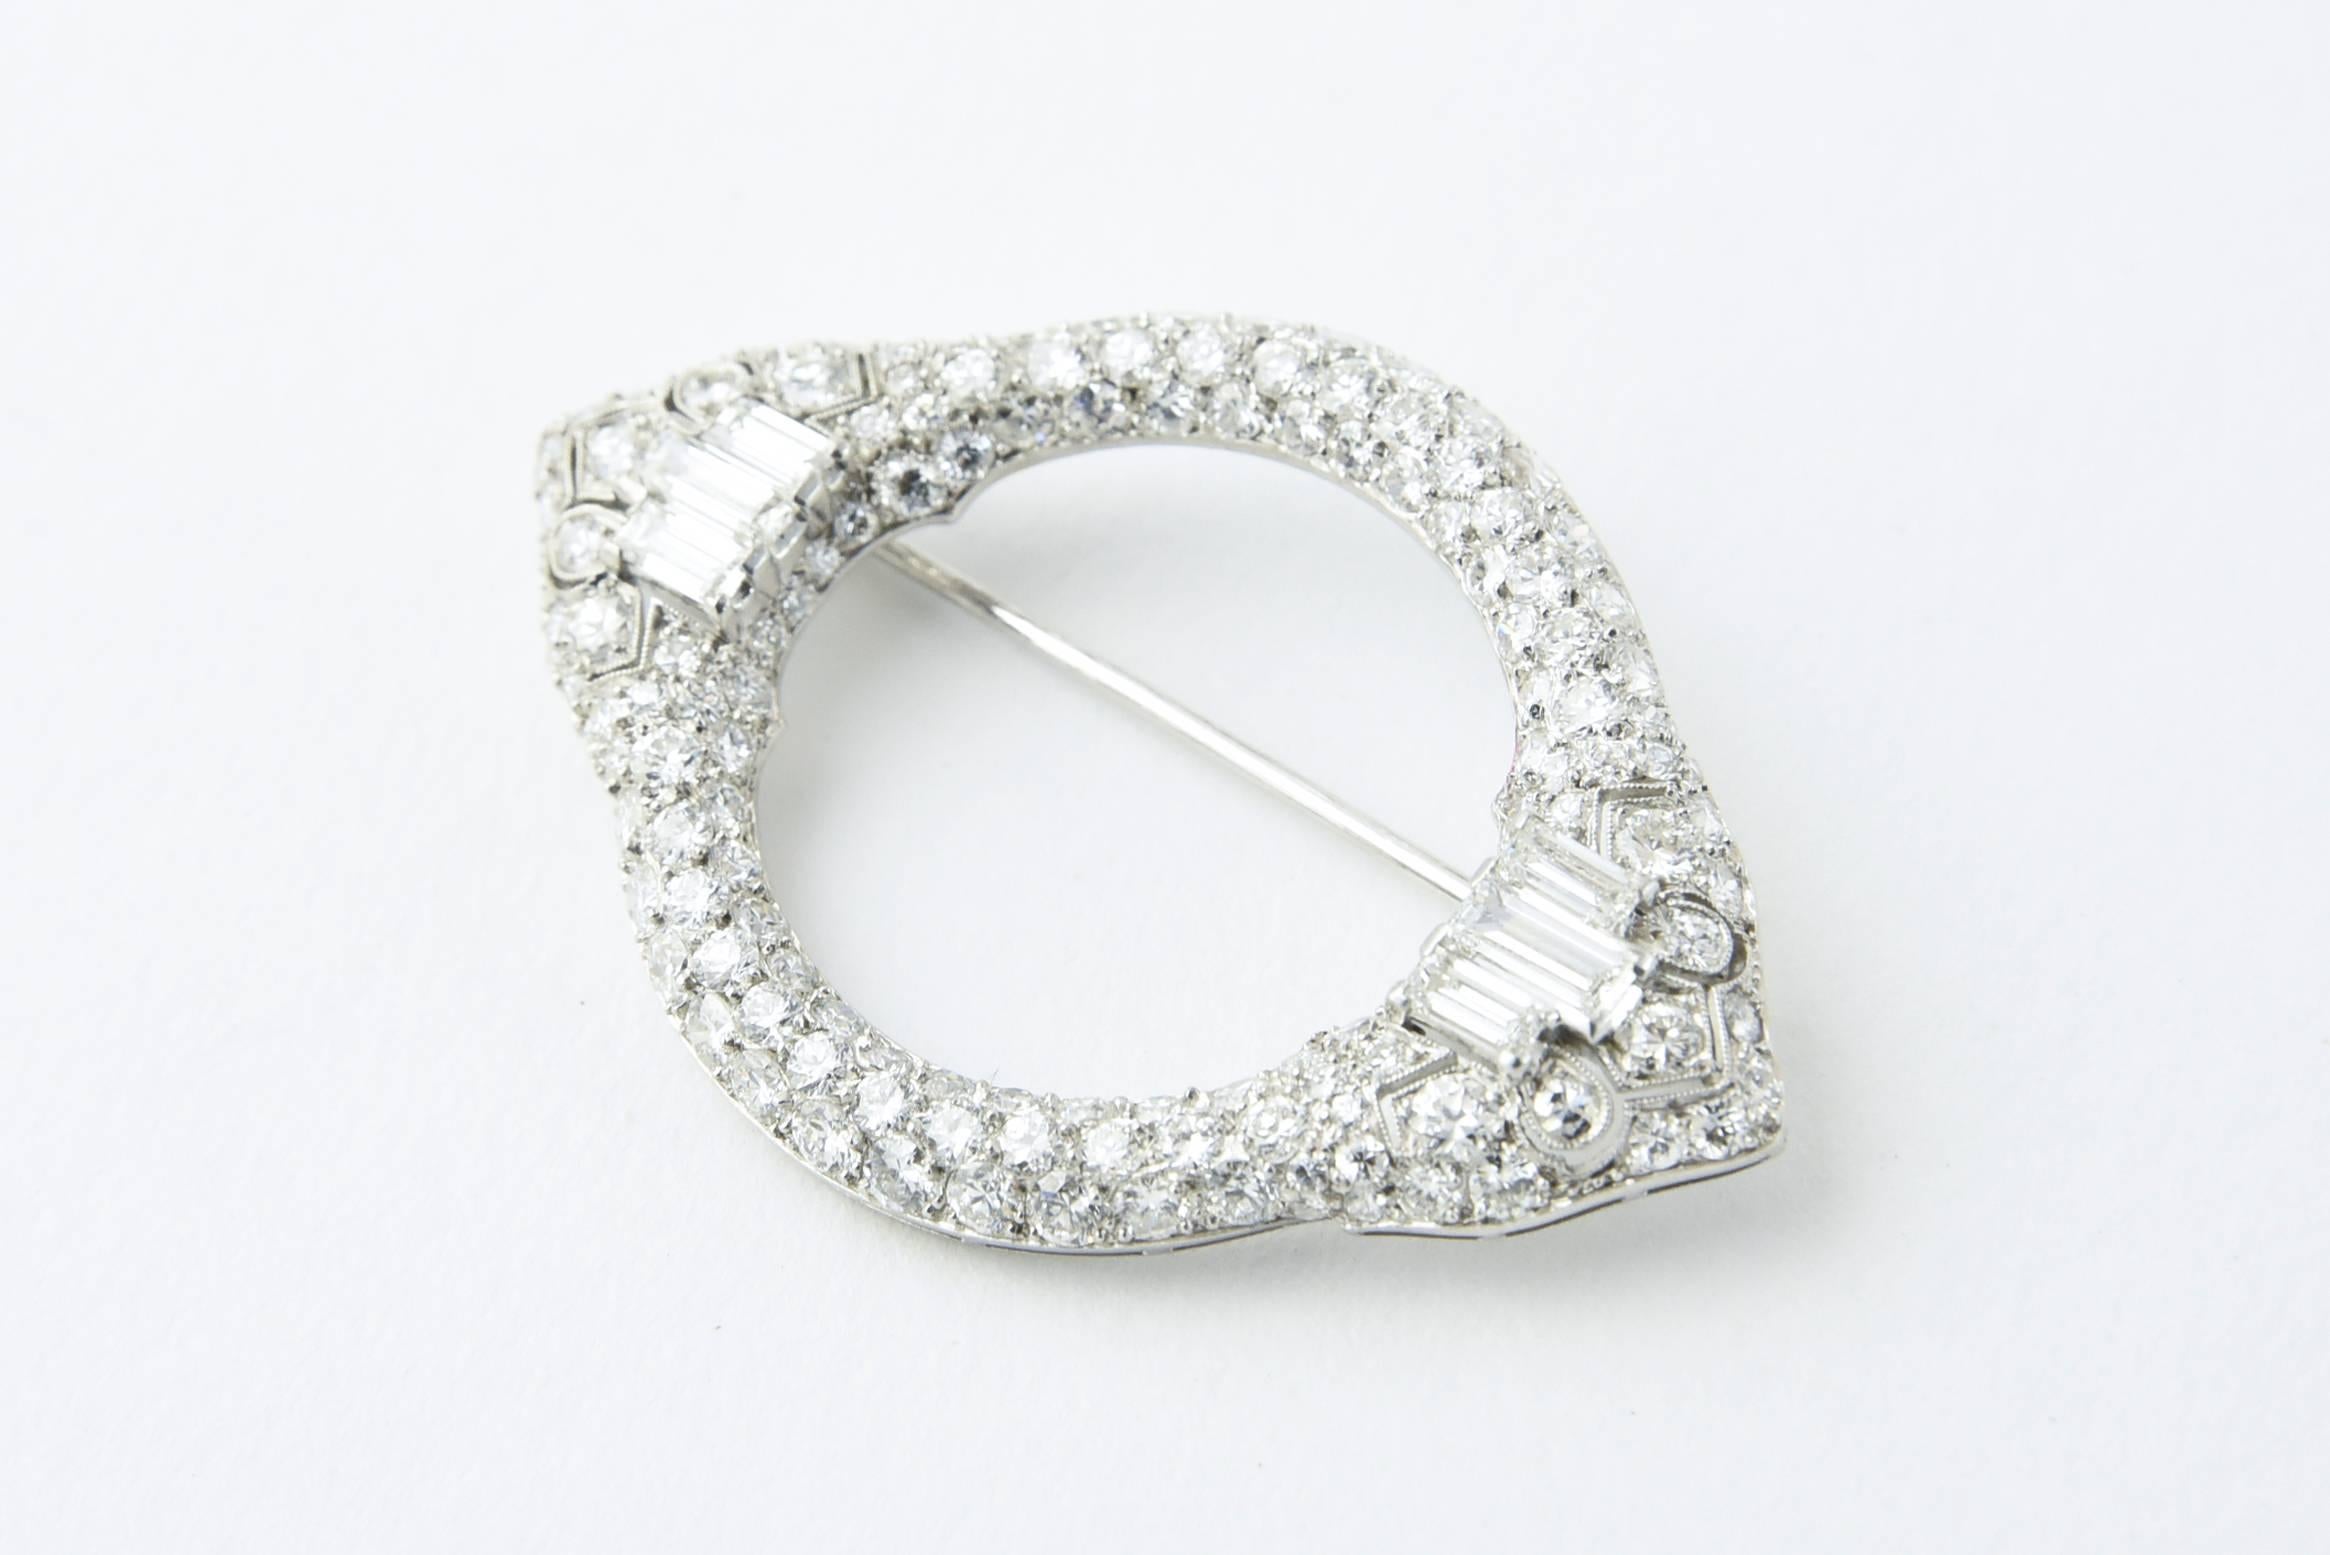 Elegant Art Deco Platinum and Diamond Circle Brooch circa 1930s consisting of bead set European cut, round brilliant cut and baguette cut diamonds for approximate 4.25 carats total weight. Great style and workmanship can be seen throughout the piece